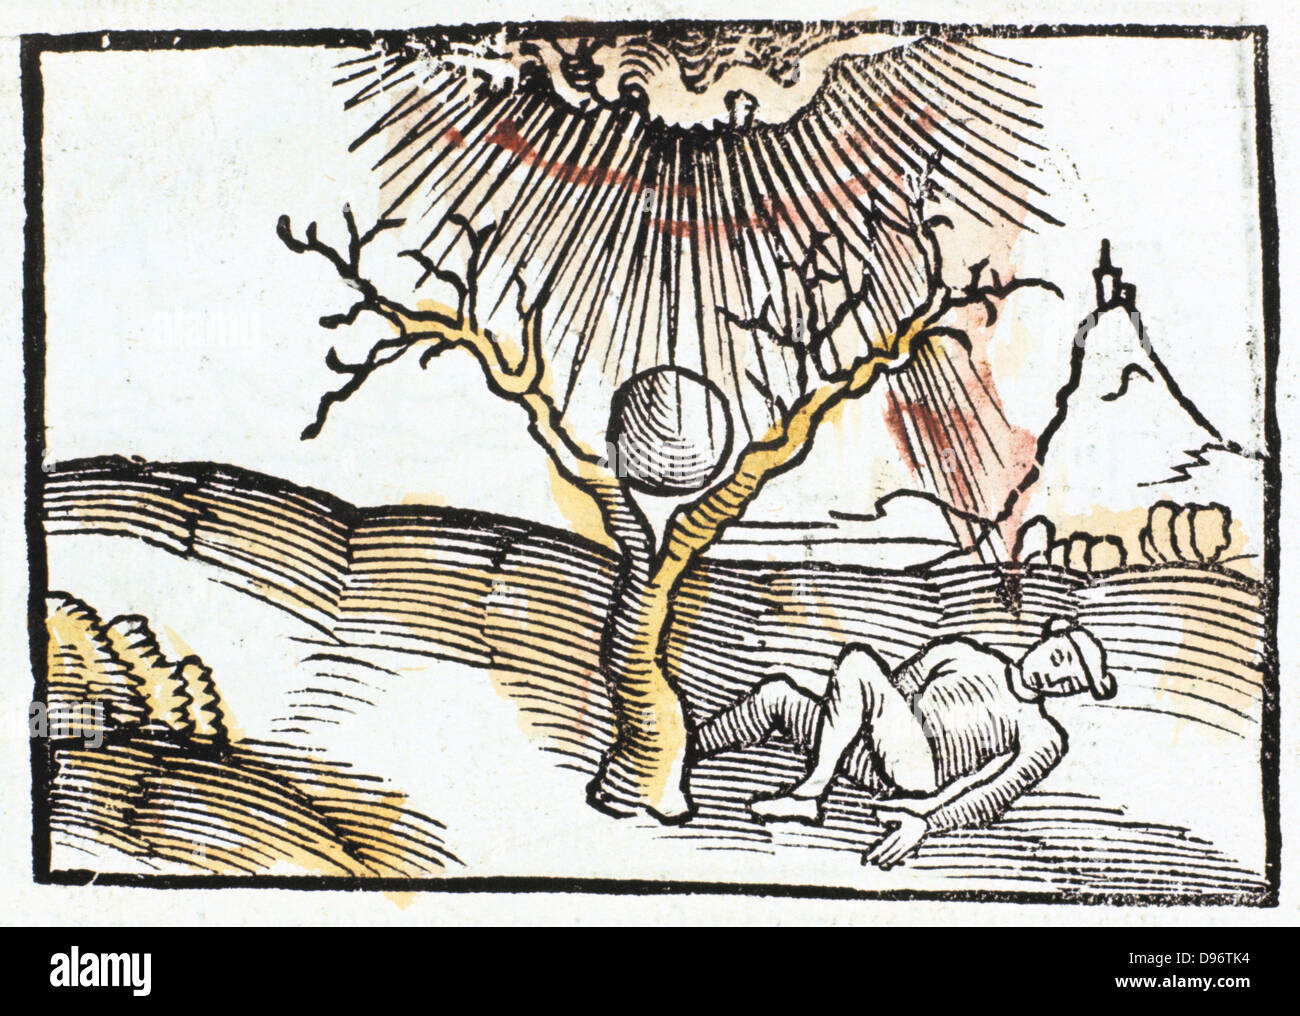 Thunderbolt or lightning, 1508. Man sheltering under a tree struck by lightning or a thunderbolt. From 'Margarita philosophica' ('The Pearl of Philosophy') by Gregor Reisch. (Basle, 1508). This book was an early encyclopaedia of knowledge for students. Stock Photo